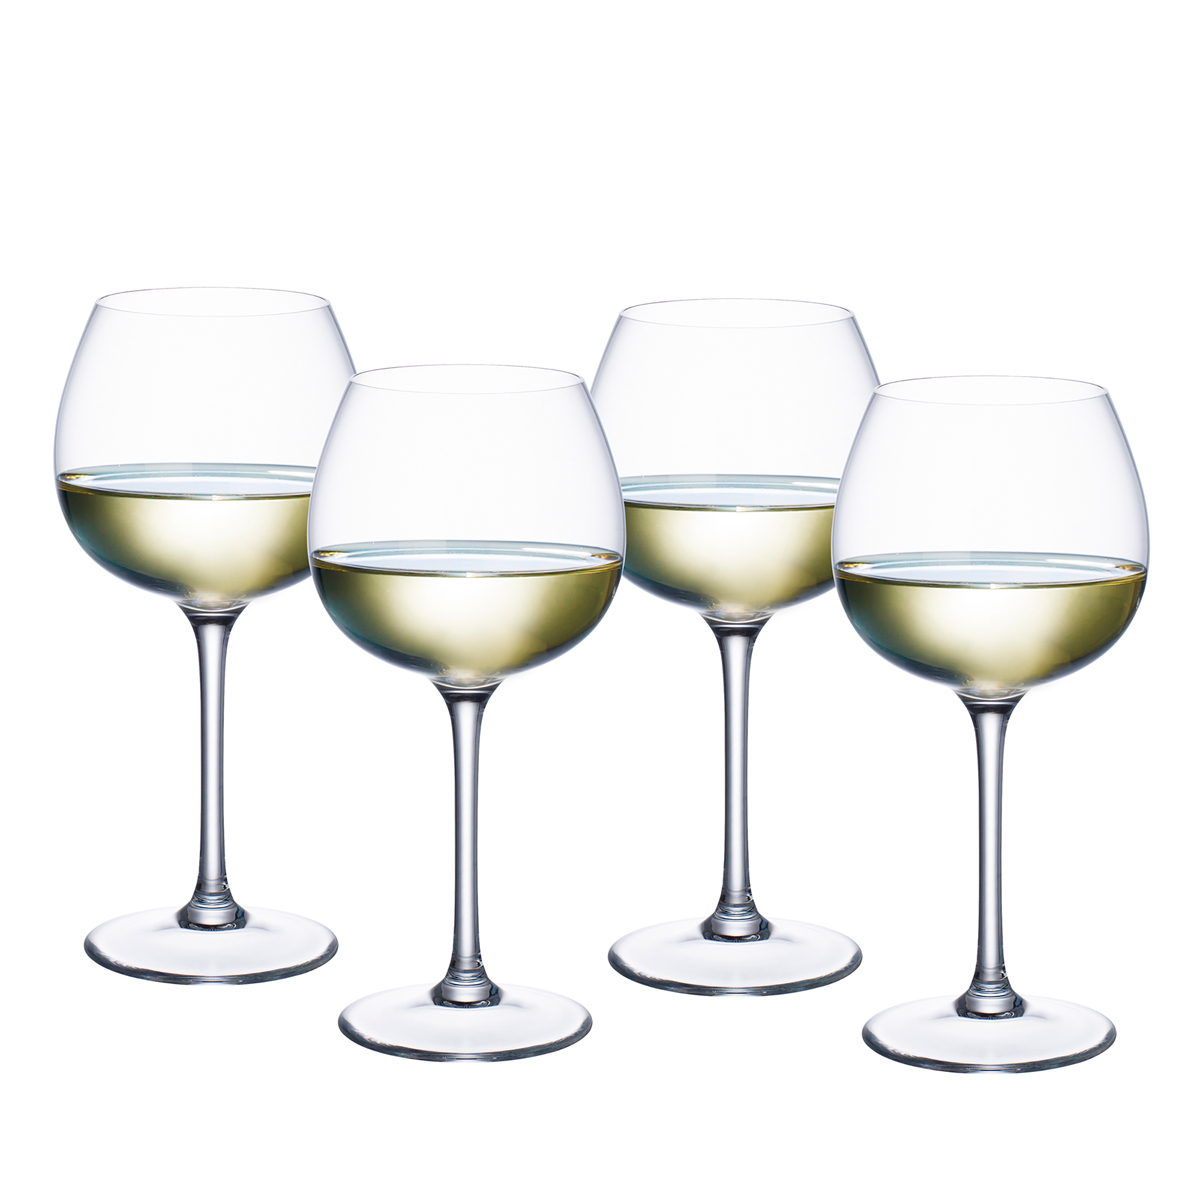 Villeroy and Boch Purismo Soft and Rounded White Wine Glasses, Set of 4